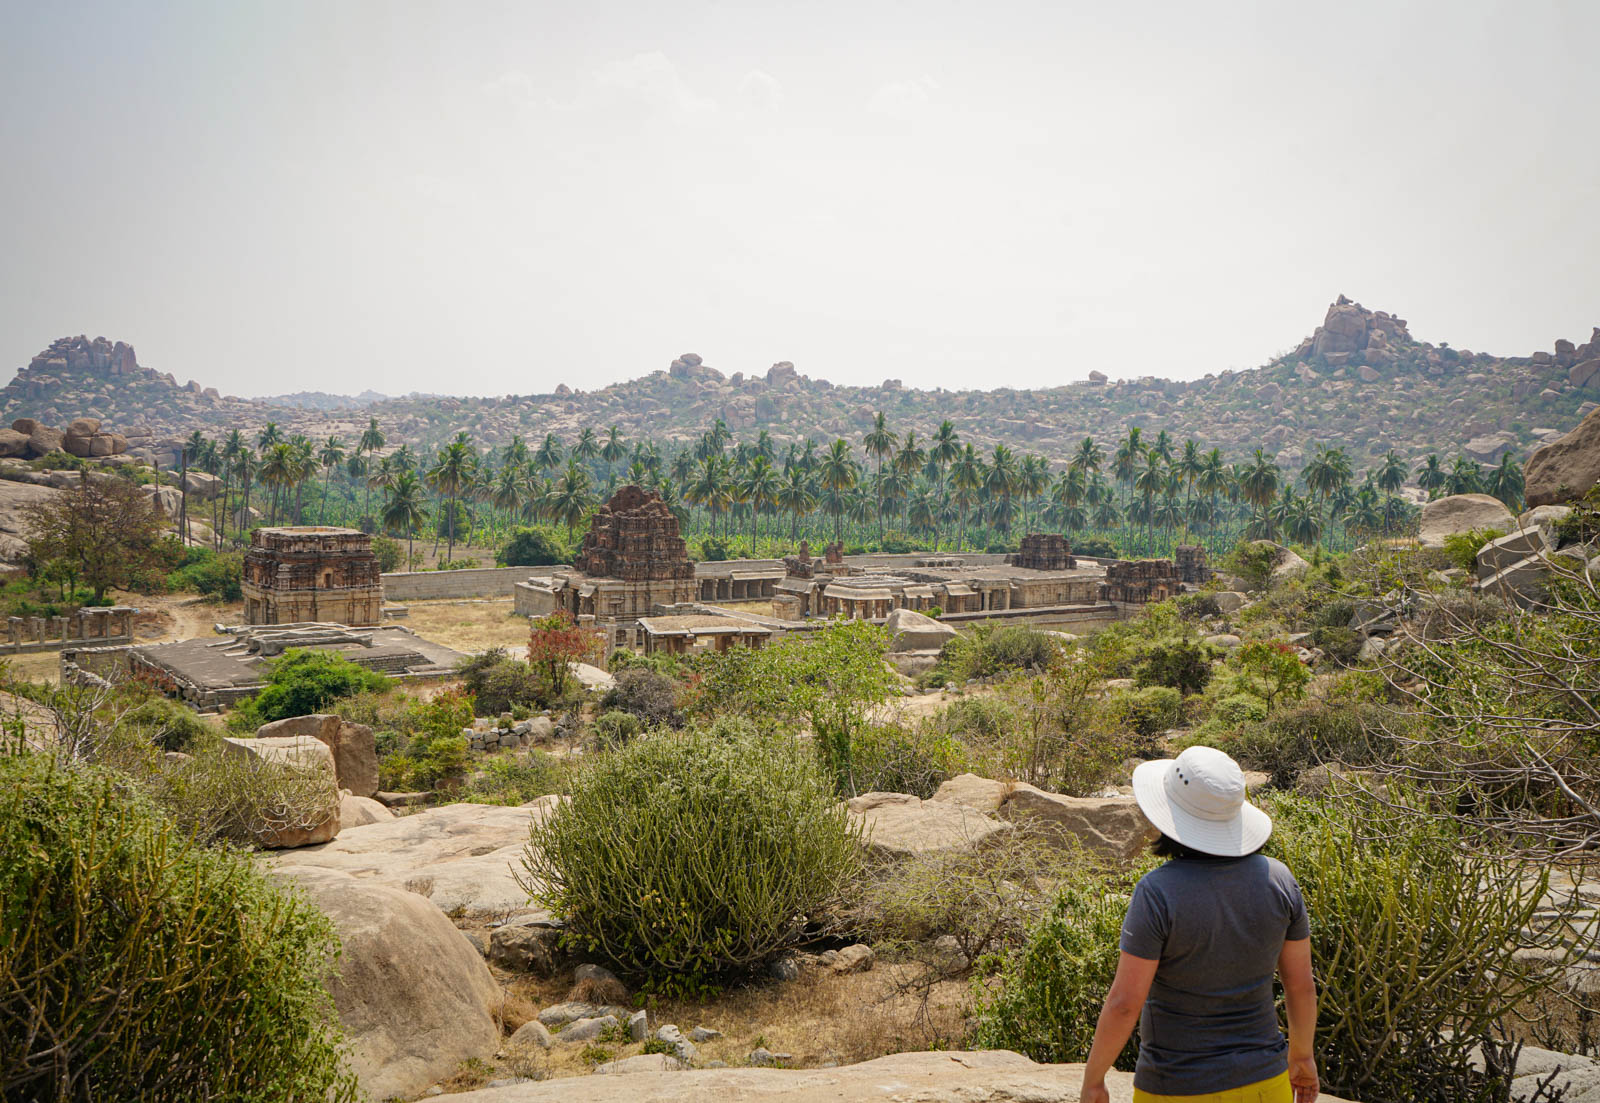 Overlooking the temple complex